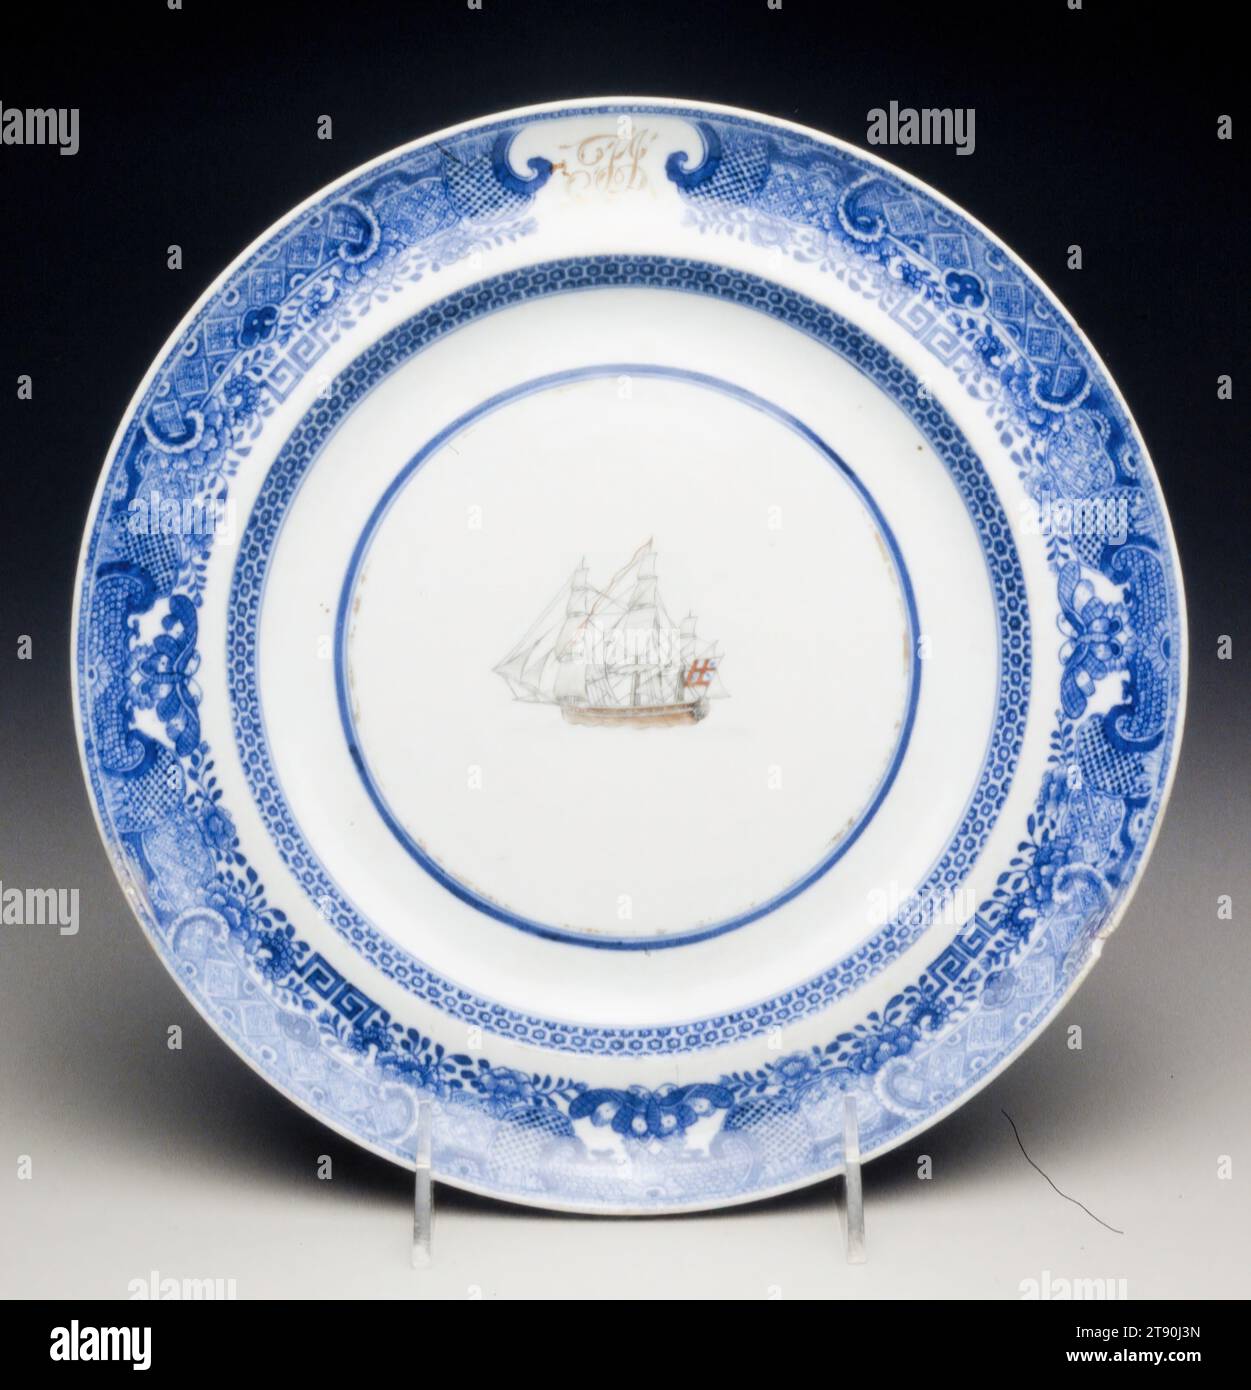 Plate with the initials 'T.J.' and sailing scene, c. 1800, 15/16 x 9 7/8 in. (2.38 x 25.08 cm), Porcelain, China, 18th-19th century, The central image on this plate shows a British East Indiaman of about 1800. The initials in the space left free in the rim design indicate that this was a popular generic underglaze blue design from Jingdezhen, to which any initials as well as vessel could be added in Canton Stock Photo